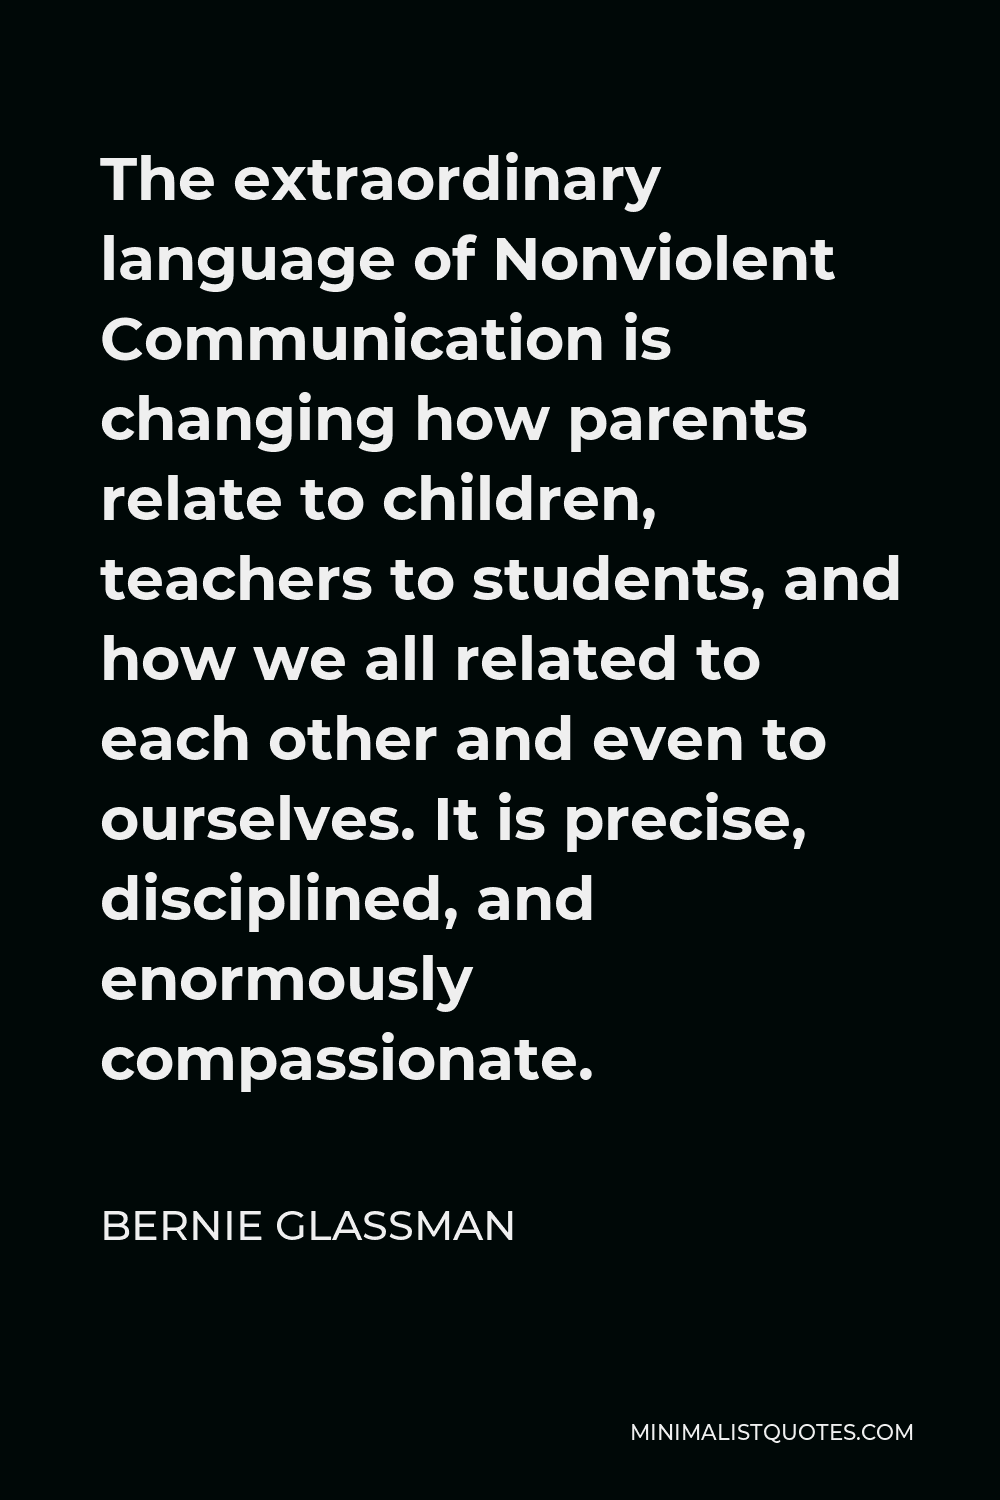 Bernie Glassman Quote - The extraordinary language of Nonviolent Communication is changing how parents relate to children, teachers to students, and how we all related to each other and even to ourselves. It is precise, disciplined, and enormously compassionate.